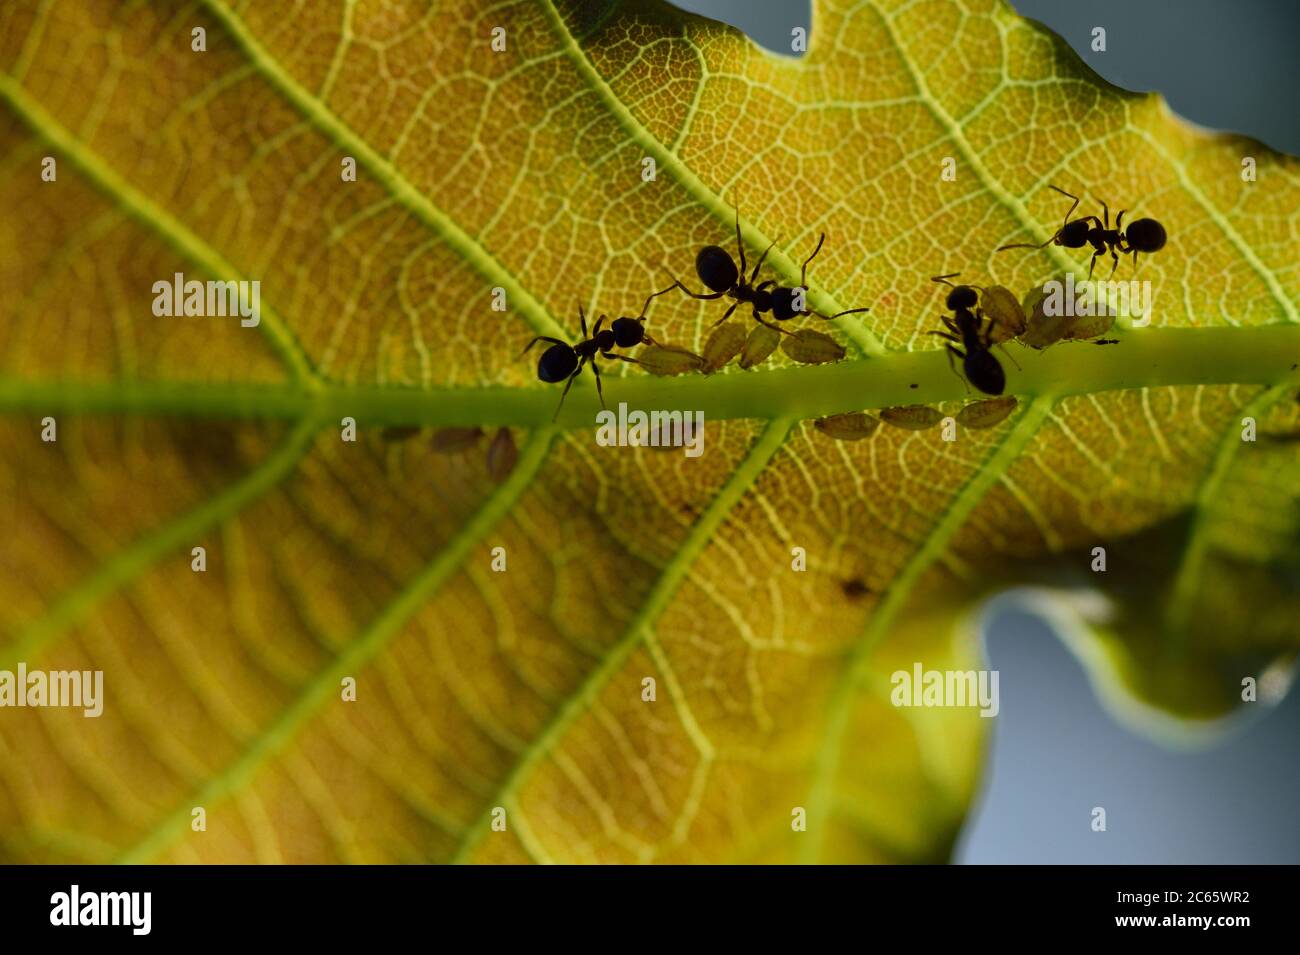 Ants looking for aphids on an oak leaf, National Park Saxon Switzerland (Saechsische Schweiz), Europe, Central Europe, Germany Stock Photo